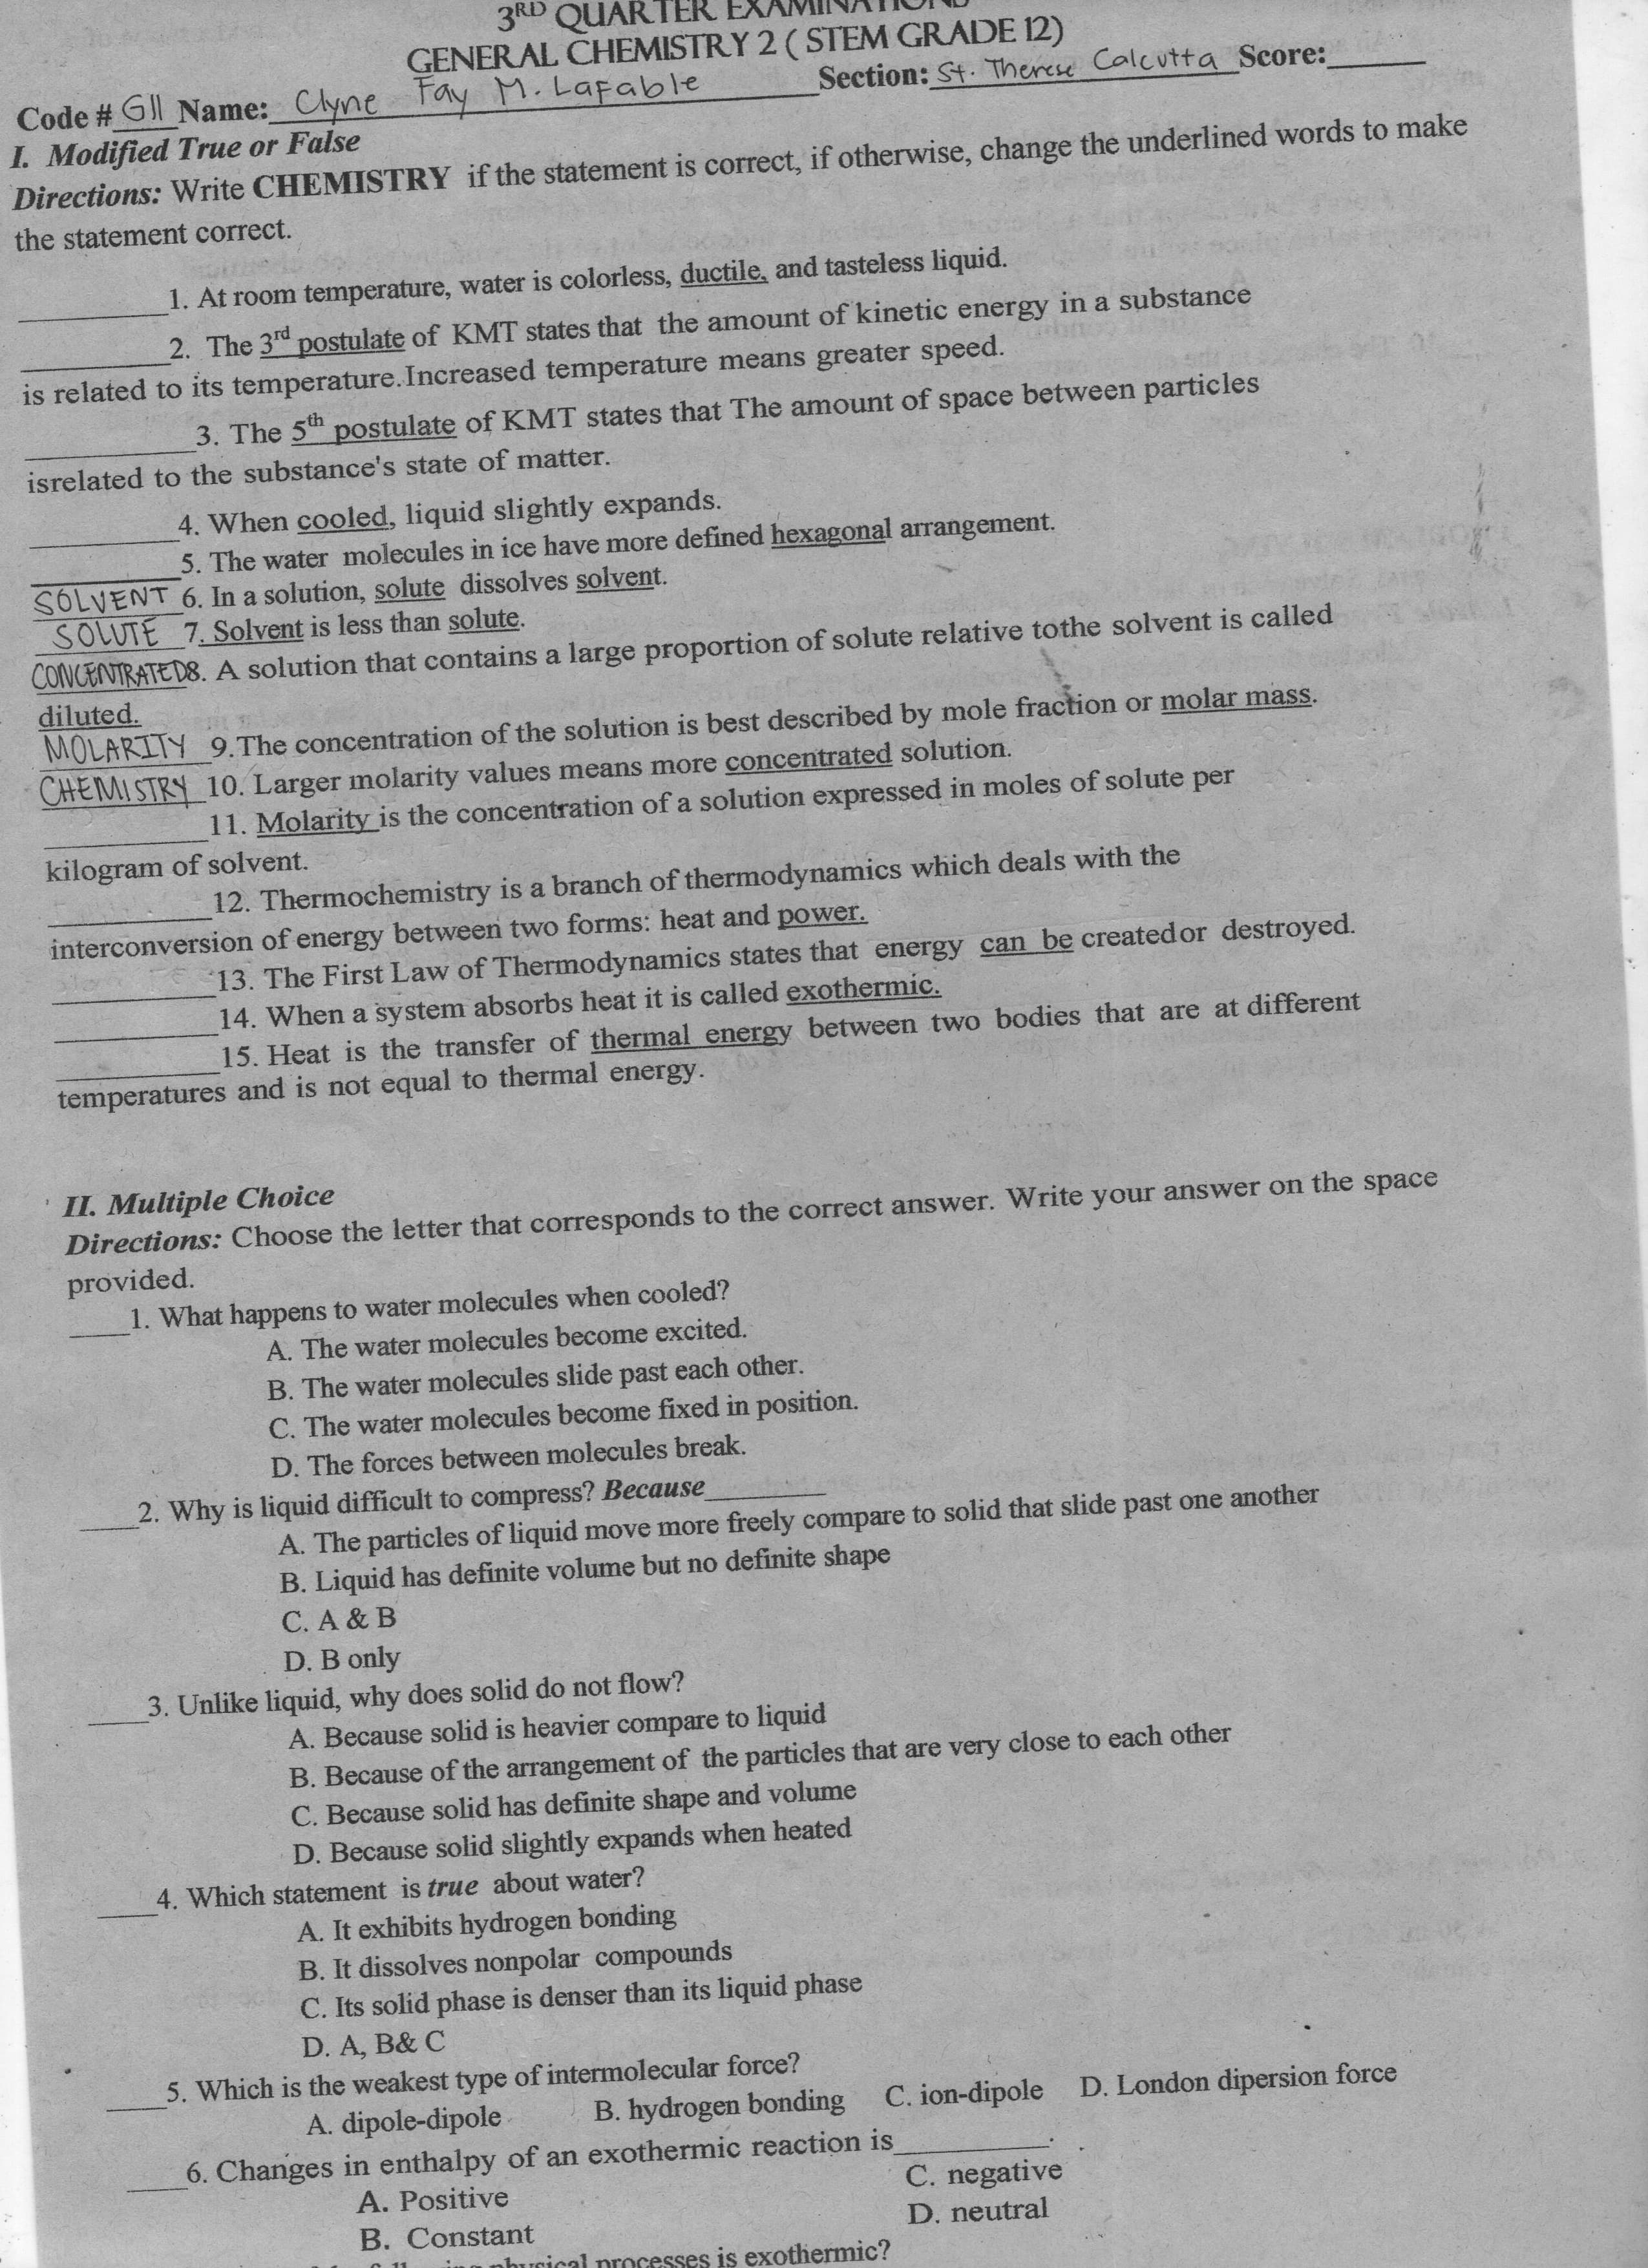 3RD QUARTER EXAMIINAIOND
GENERAL CHEMISTRY 2 ( STEM GRADE 12)
Fay M.Lafable
Code # Gl Name: Clyne
I. Modified True or False
Directions: Write CHEMISTRY if the statement is correct, if otherwise, change the underlined words to make
Section: St. Therese Calcutta Score:
the statement correct.
1. At room temperature, water is colorless, ductile, and tasteless liquid.
2. The 3d postulate of KMT states that the amount of kinetic energy in a substance
is related to its temperature.Increased temperature means greater speed.
3. The 5th postulate of KMT states that The amount of space between particles
isrelated to the substance's state of matter.
4. When cooled, liquid slightly expands.
5. The water molecules in ice have more defined hexagonal arrangement.
SOLVENT 6. In a solution, solute dissolves solvent.
SOLUTE 7. Solvent is less than solute.
CONCENTRATED8. A solution that contains a large proportion of solute relative tothe solvent is called
diluted.
MOLARITY 9.The concentration of the solution is best described by mole fraction or molar mass.
CHEMISTRY 10. Larger molarity values means more concentrated solution.
11. Molarity is the concentration of a solution expressed in moles of solute per
kilogram of solvent.
12. Thermochemistry is a branch of thermodynamics which deals with the
interconversion of energy between two forms: heat and power.
13. The First Law of Thermodynamics states that energy can be created or destroyed.
14. When a system absorbs heat it is called exothermic.
15. Heat is the transfer of thermal energy between two bodies that are at different
temperatures and is not equal to thermal energy.
' II. Multiple Choice
Directions: Choose the letter that corresponds to the correct answer. Write your answer on the space
provided.
1. What happens to water molecules when cooled?
A. The water molecules become excited.
B. The water molecules slide past each other.
C. The water molecules become fixed in position.
D. The forces between molecules break.
2. Why is liquid difficult to compress? Because
A. The particles of liquid move more freely compare to solid that slide past one another
B. Liquid has definite volume but no definite shape
C. A & B
D. B only
3. Unlike liquid, why does solid do not flow?
A. Because solid is heavier compare to liquid
B. Because of the arrangement of the particles that are very close to each other
C. Because solid has definite shape and volume
D. Because solid slightly expands when heated
4. Which statement is true about water?
A. It exhibits hydrogen bonding
B. It dissolves nonpolar compounds
C. Its solid phase is denser than its liquid phase
D. A, B& C
5. Which is the weakest type of intermolecular force?
B. hydrogen bonding
6. Changes in enthalpy of an exothermic reaction is
A. dipole-dipole
C. ion-dipole D. London dipersion force
A. Positive
C. negative
B. Constant
D. neutral
is exothermic?
